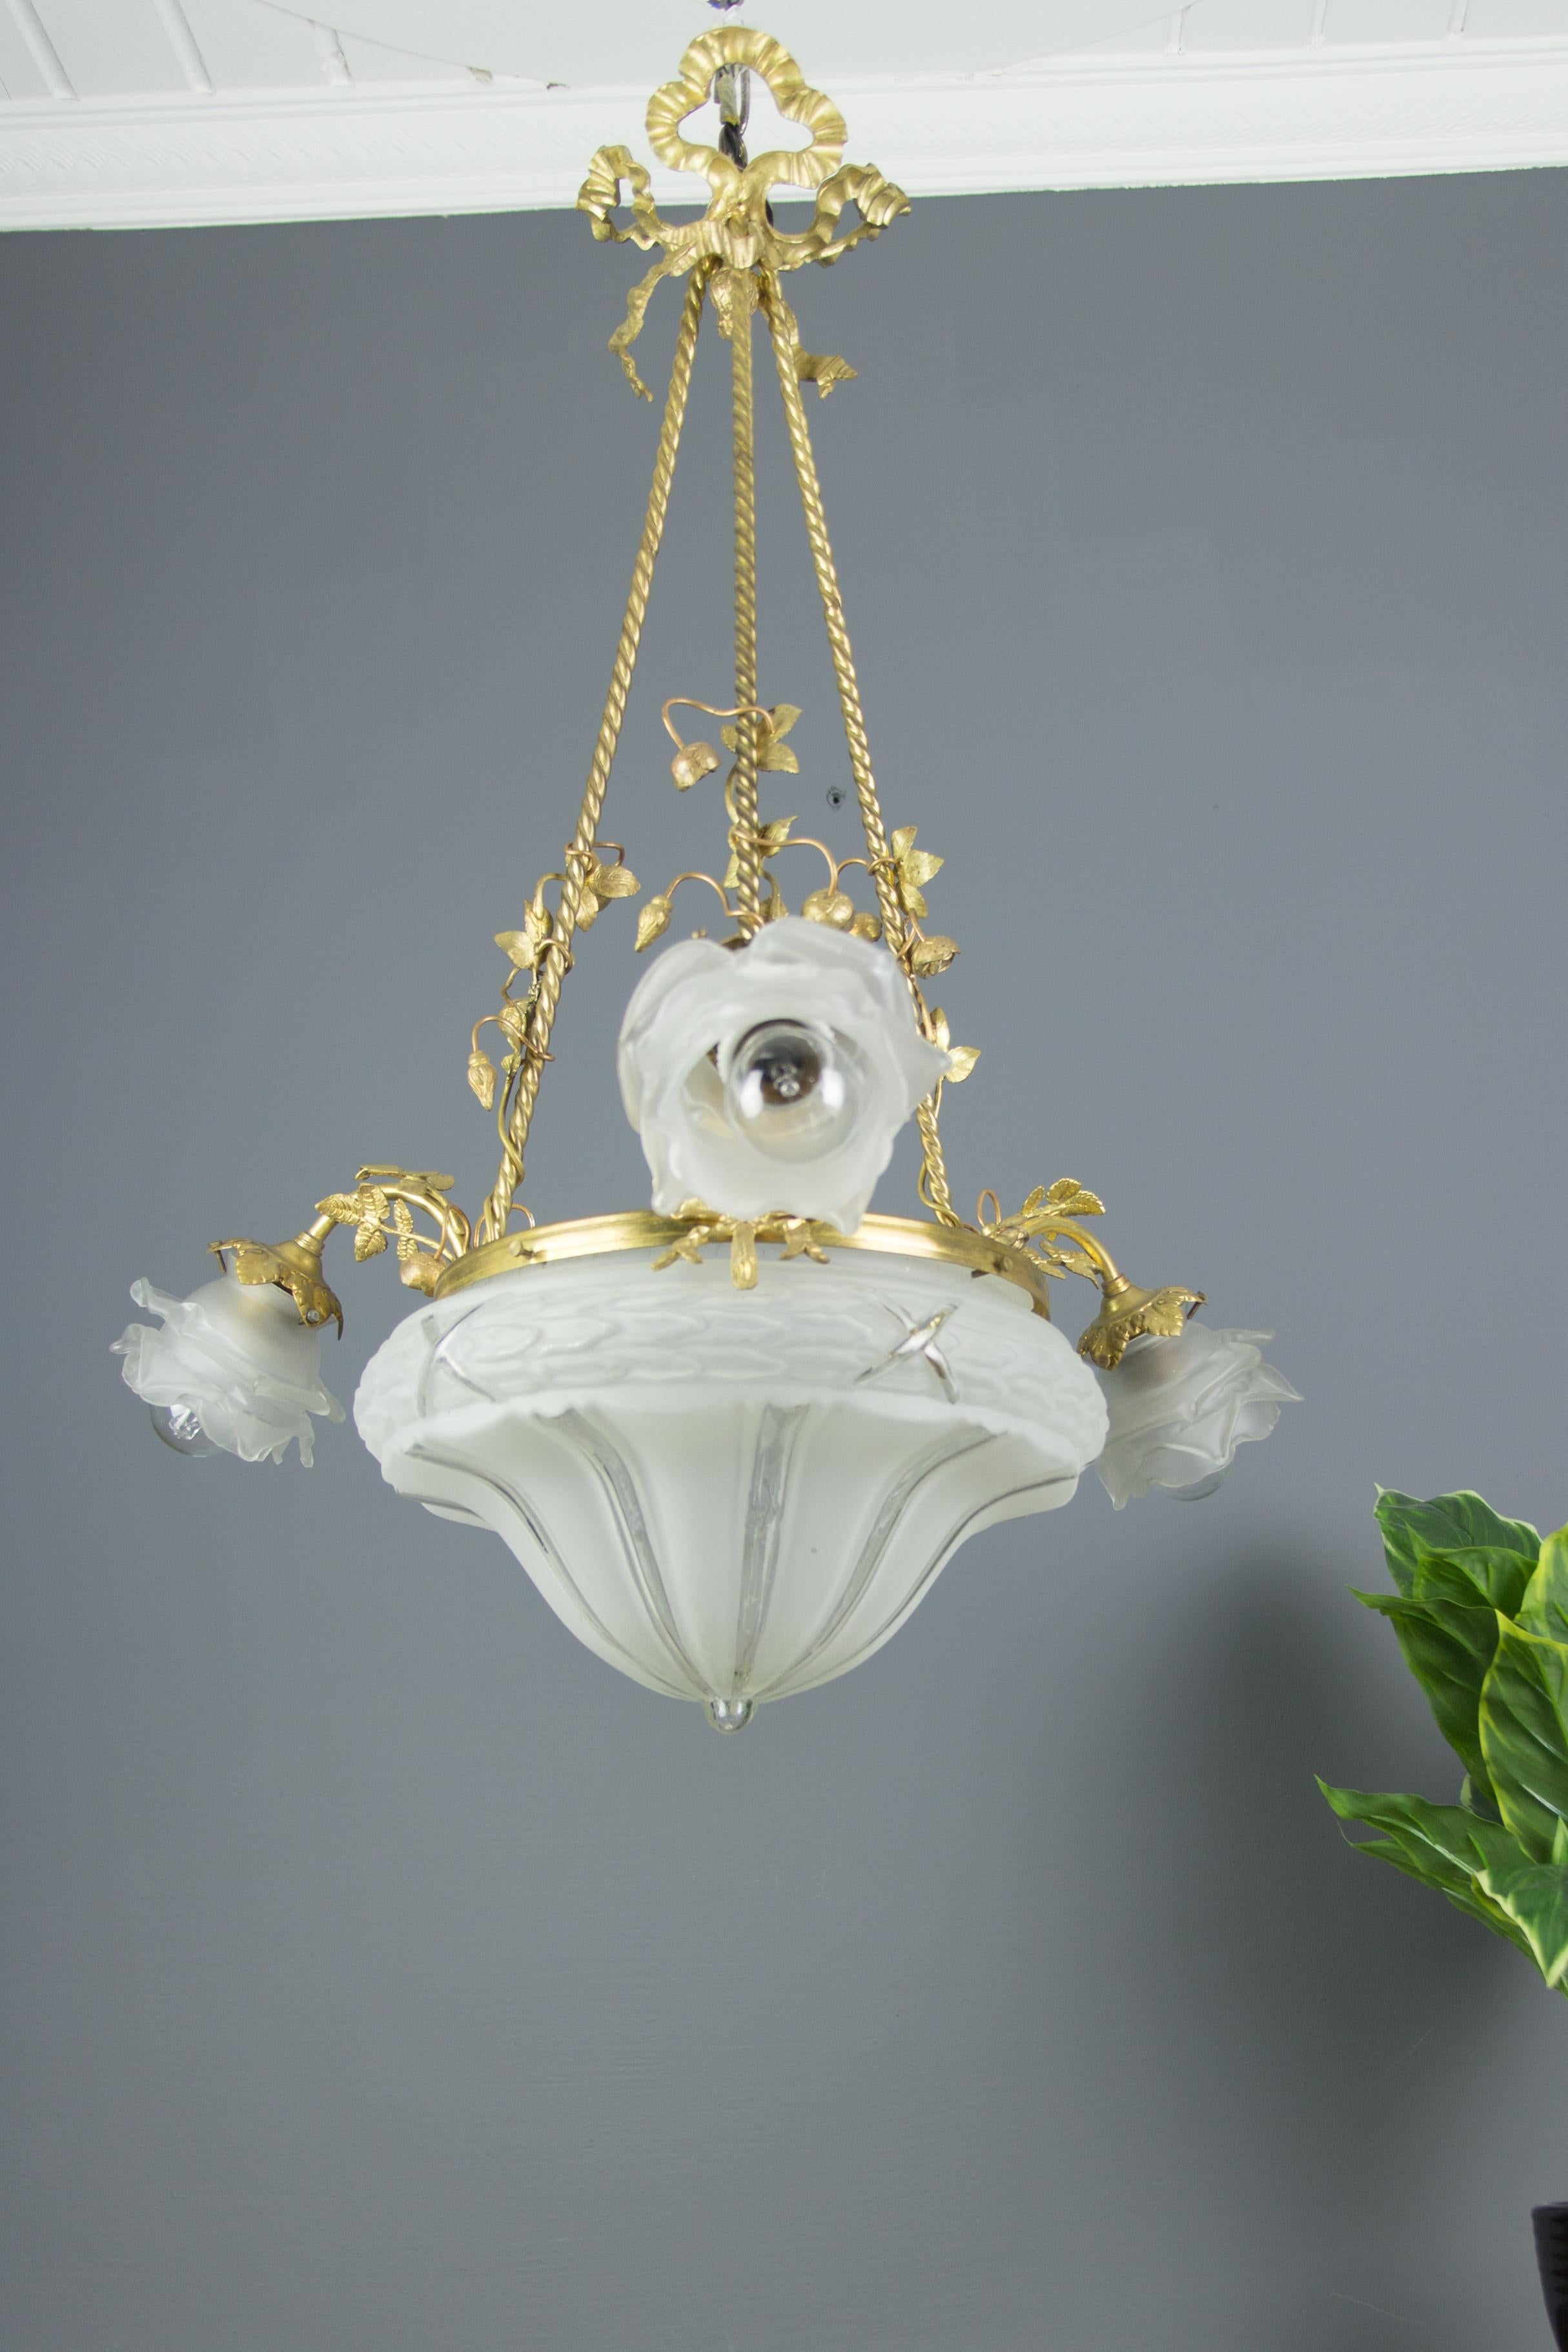 French Louis XVI style gilt bronze and frosted glass four-light chandelier, embellished with bronze flowers, has three arms, each with frosted glass floral shape lampshade and original E27 (E26) socket.
Measures: Height is 28.3 inches / 72 cm,